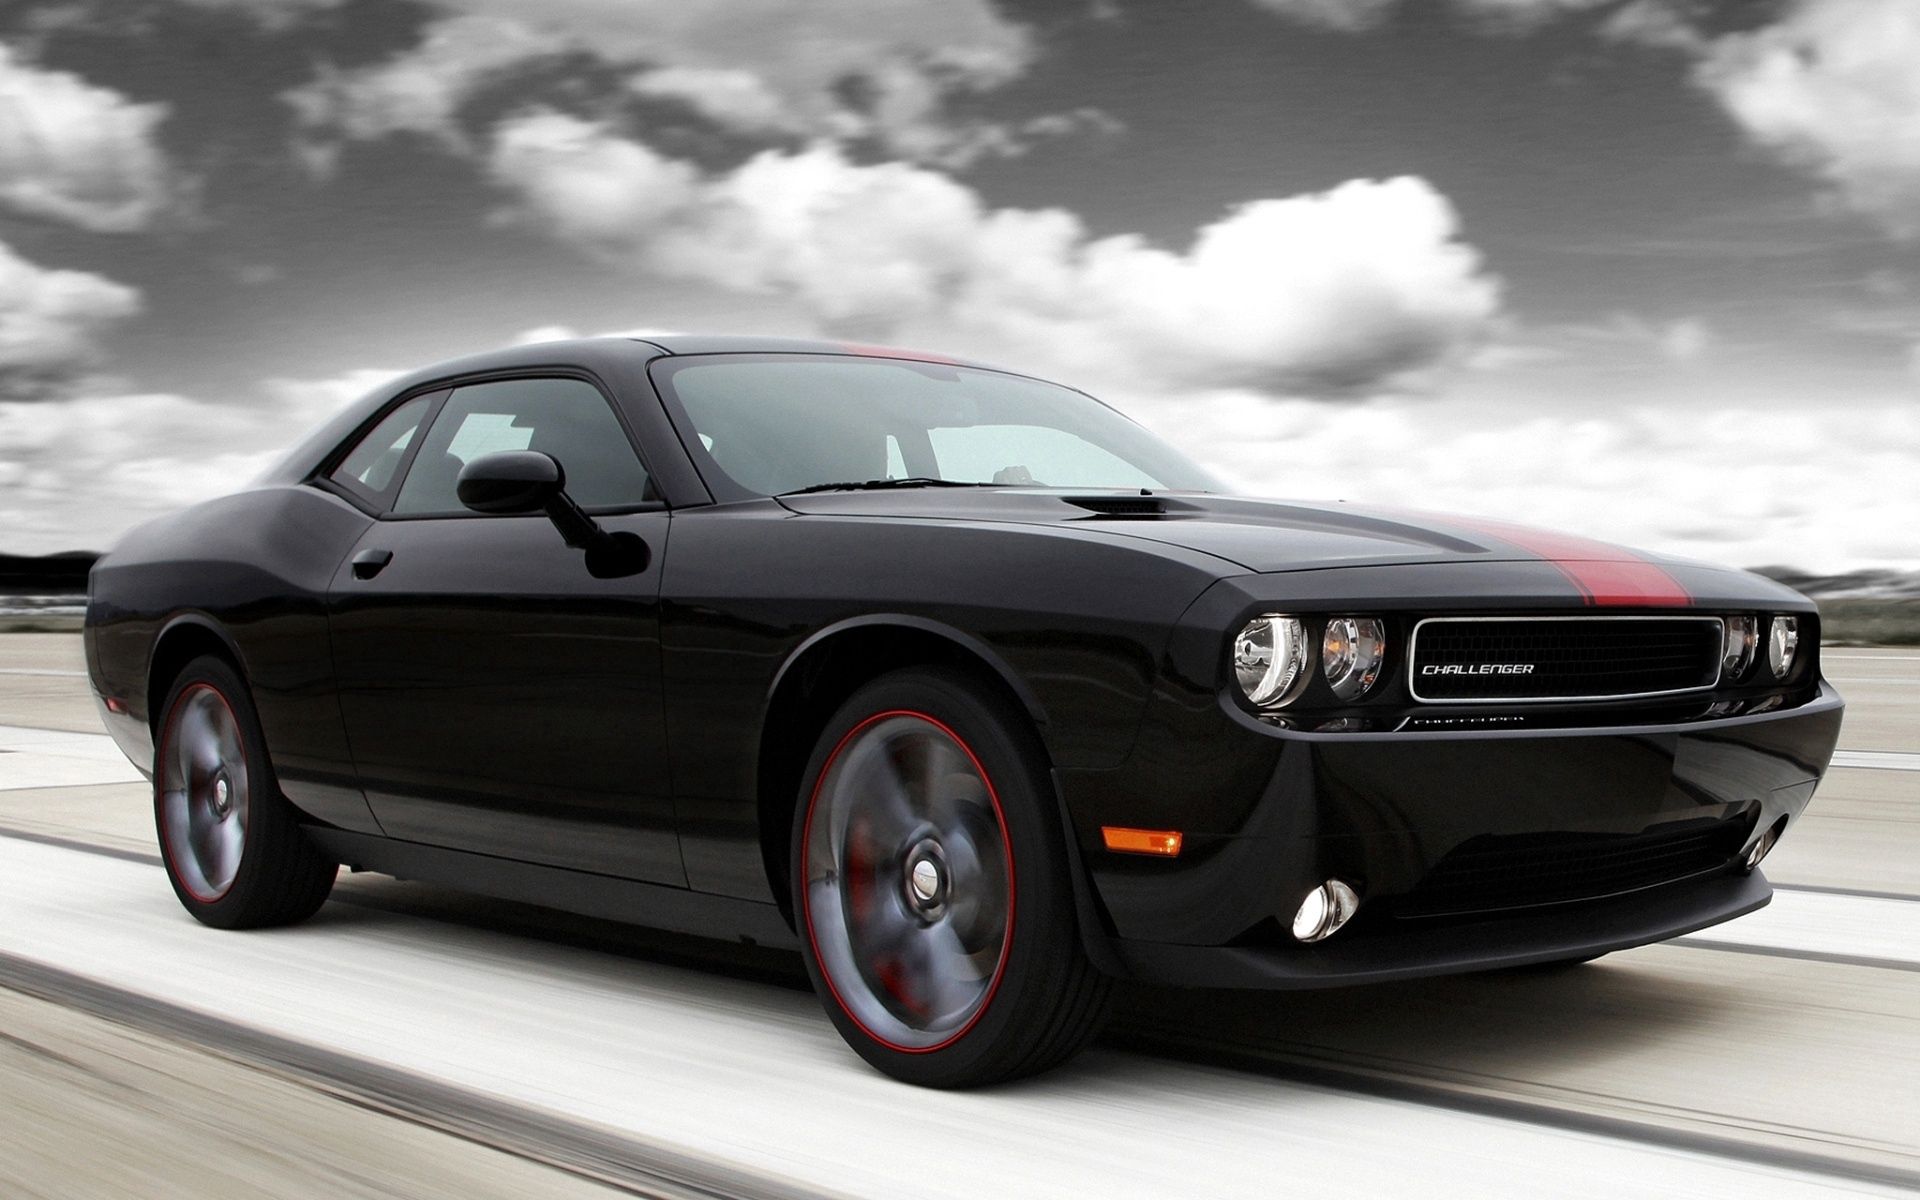 144386 download wallpaper rallye redline, cars, dodge, muscle car, challenger, front end, limber screensavers and pictures for free